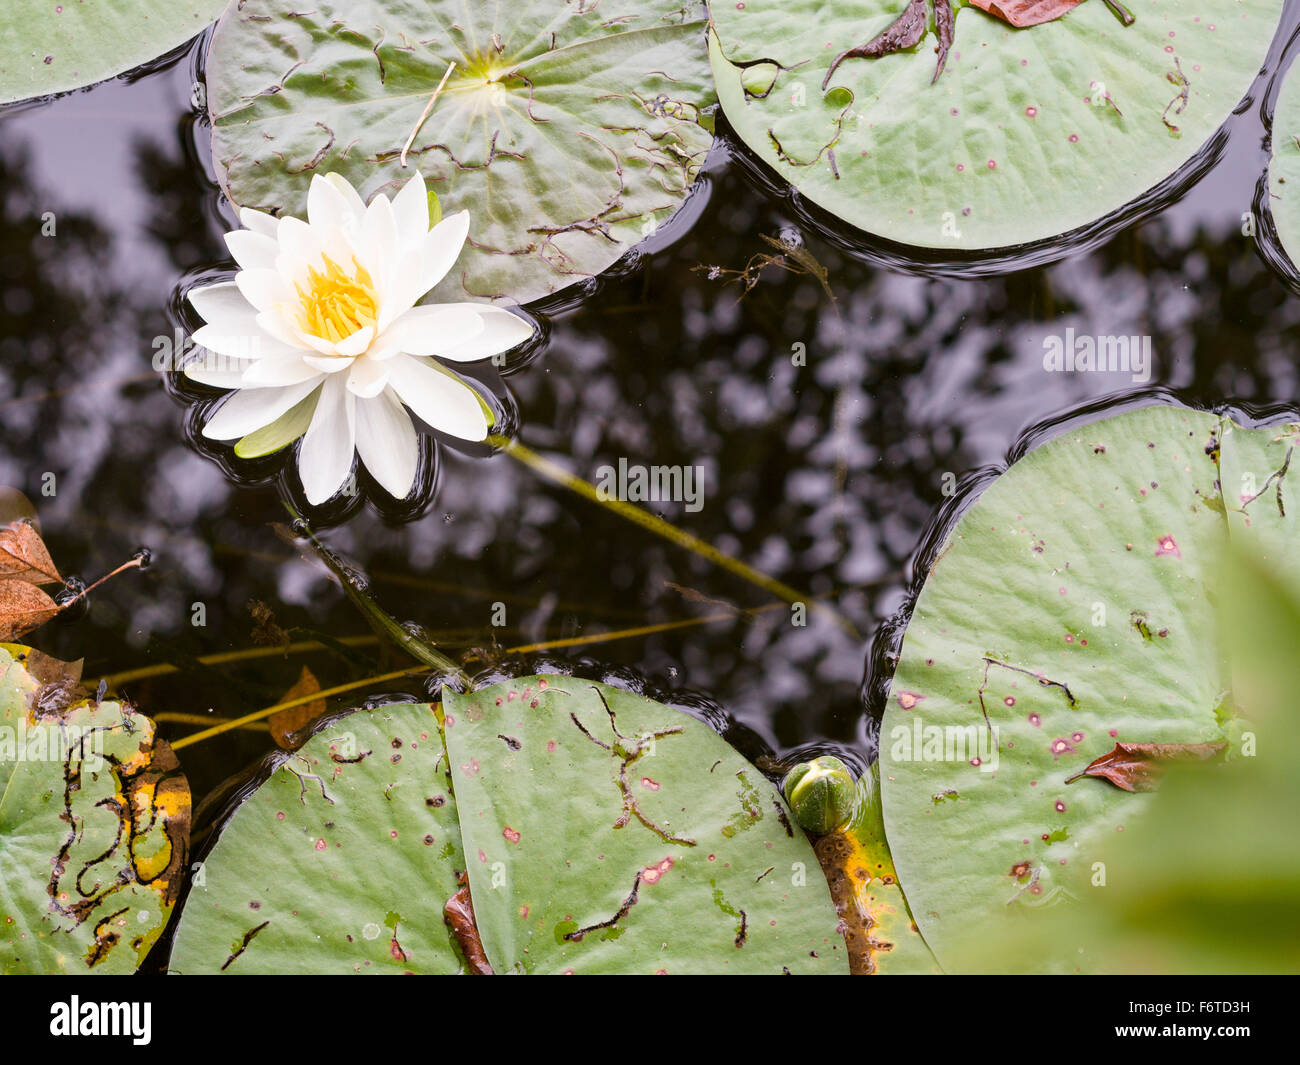 White waterlily floating on a pond. A white lily in full bloom surrounded by black water and green floating leaves. Stock Photo